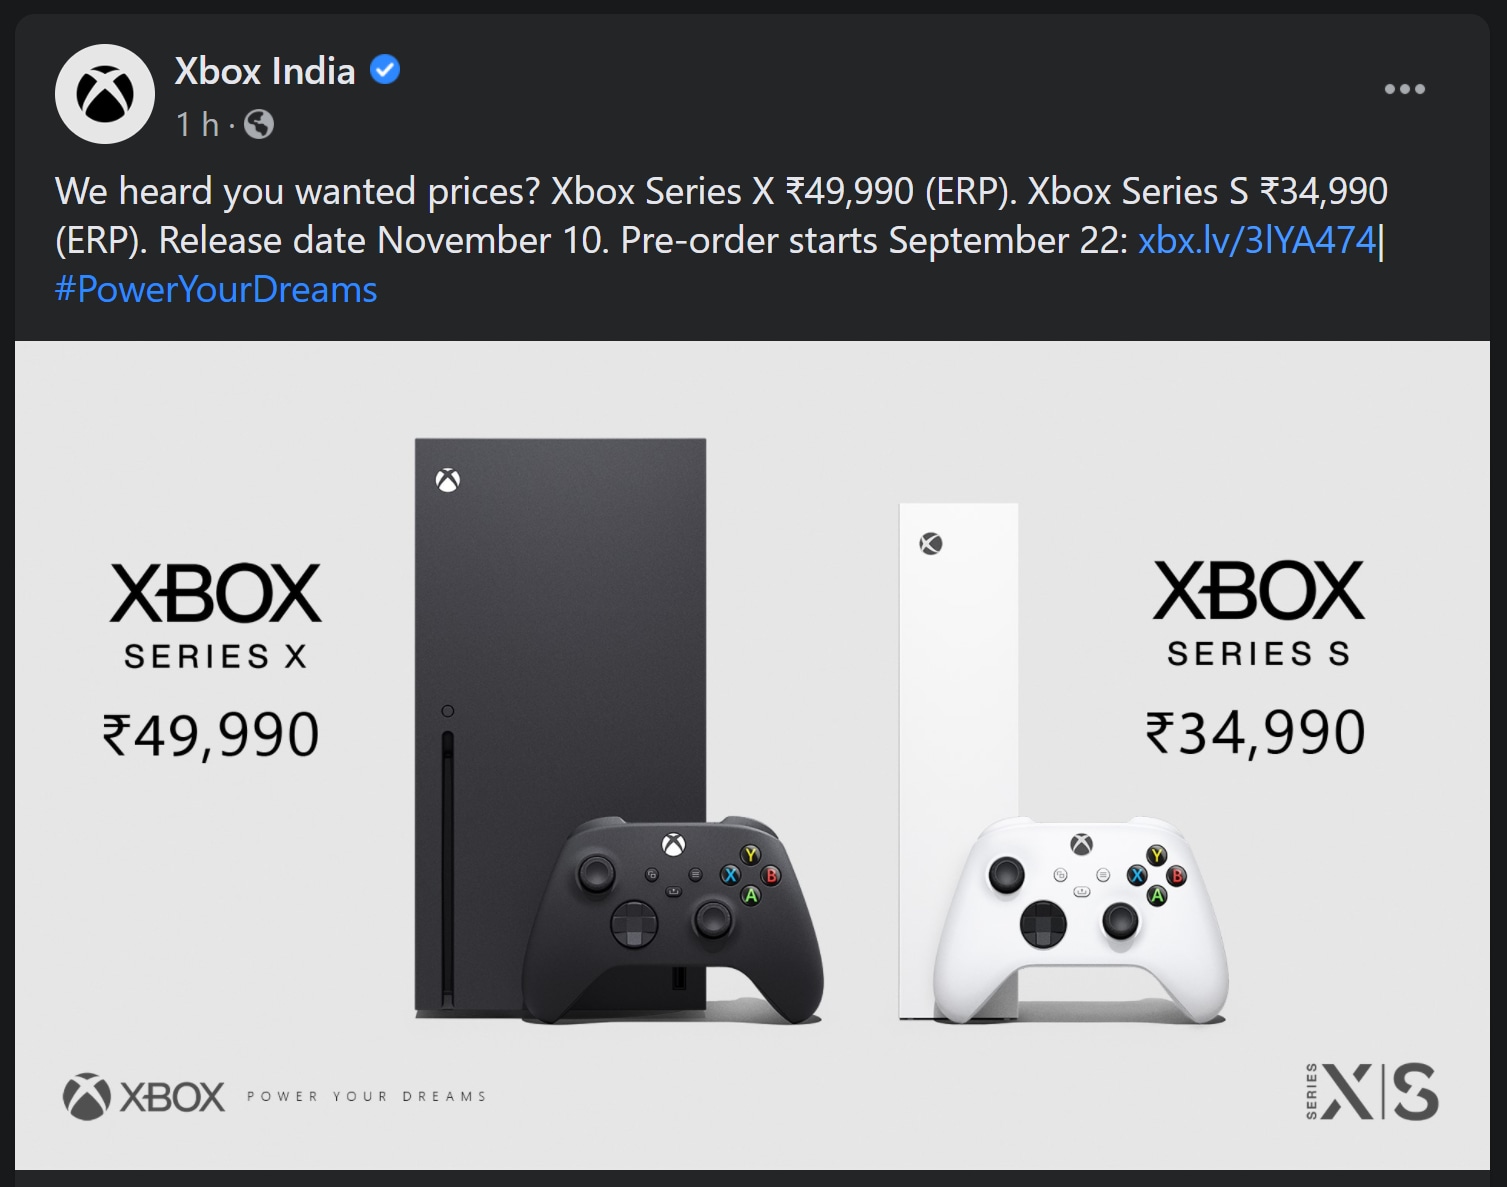 how much is the xbox one x 1tb bundle, 2 games and 3 months game pass at costco